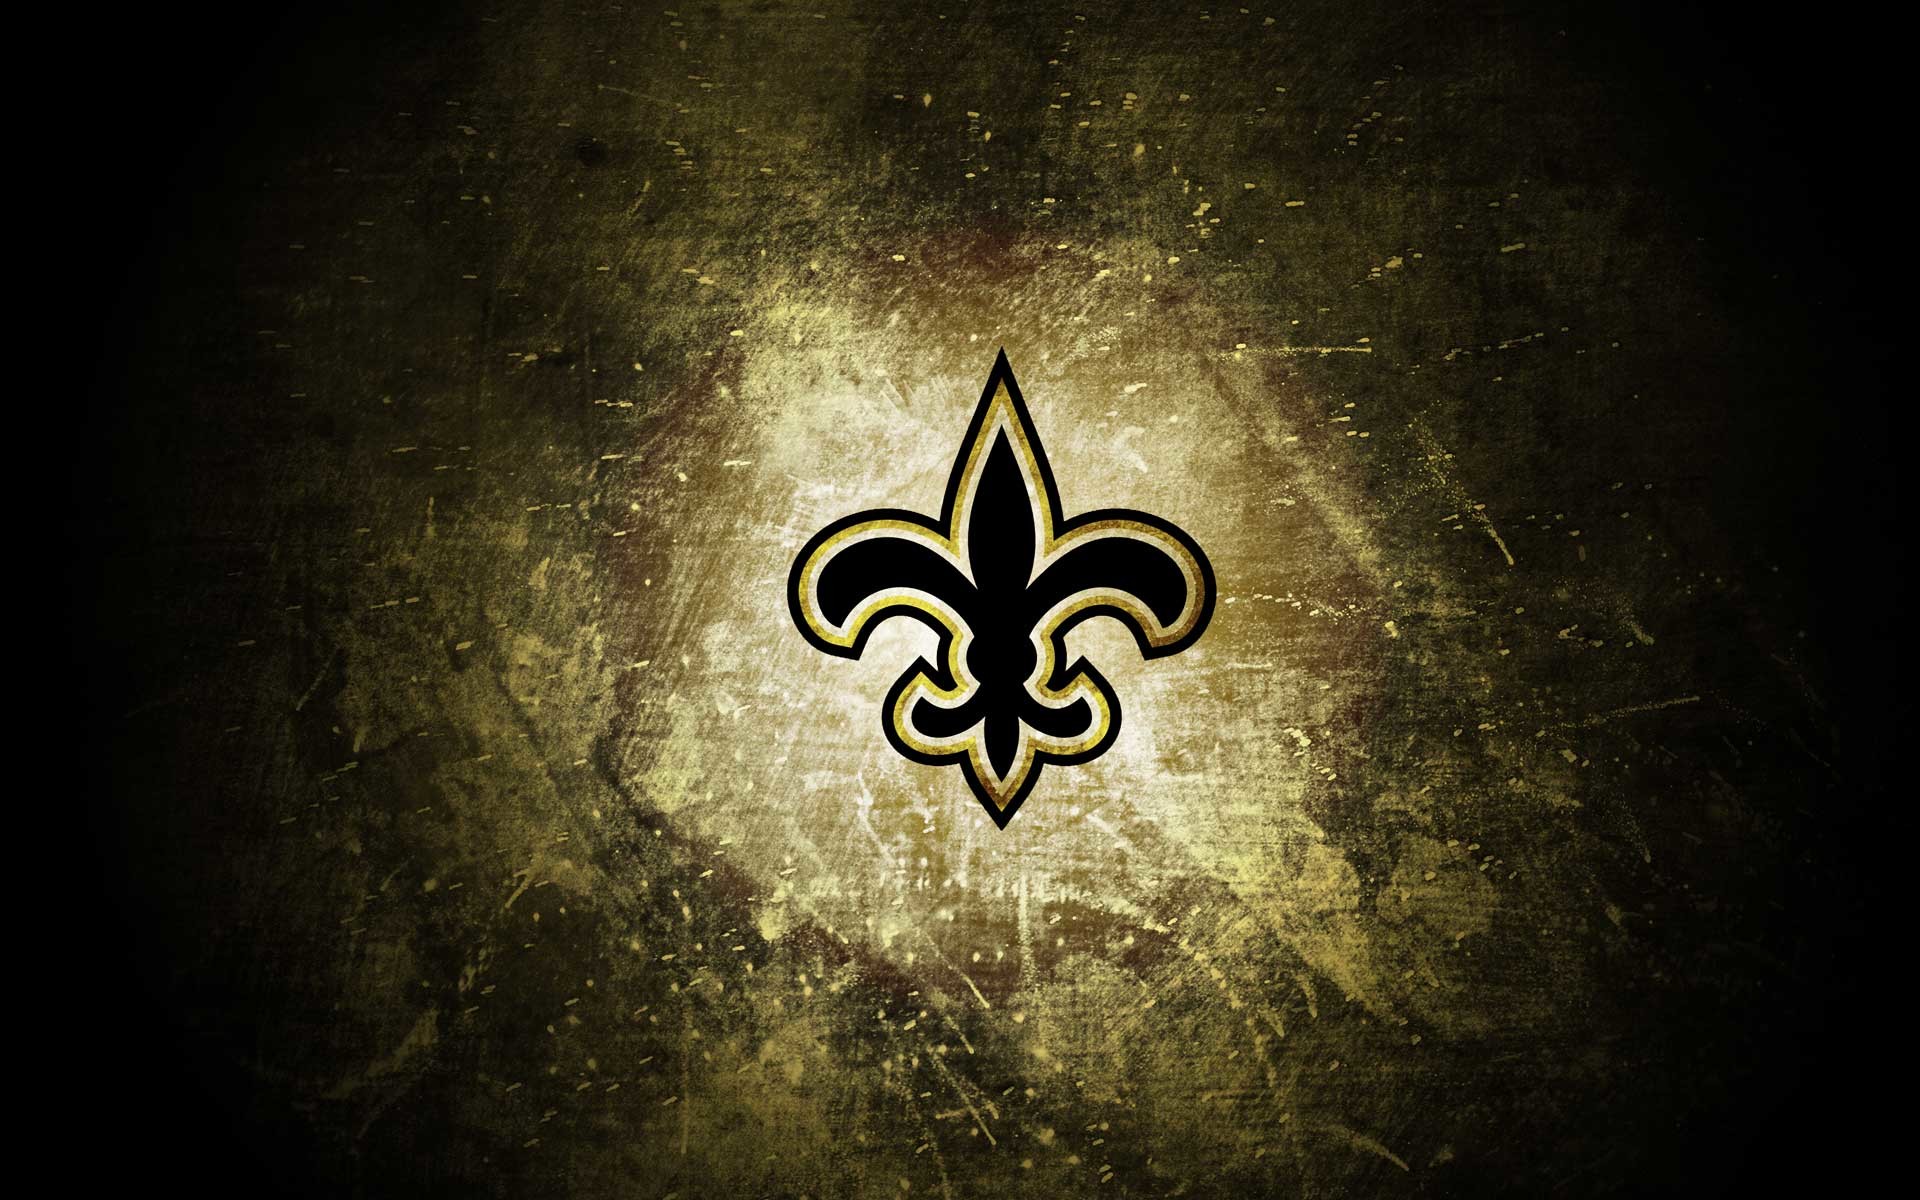 New Orleans Saints Wallpapers  Top Free New Orleans Saints Backgrounds   WallpaperAccess